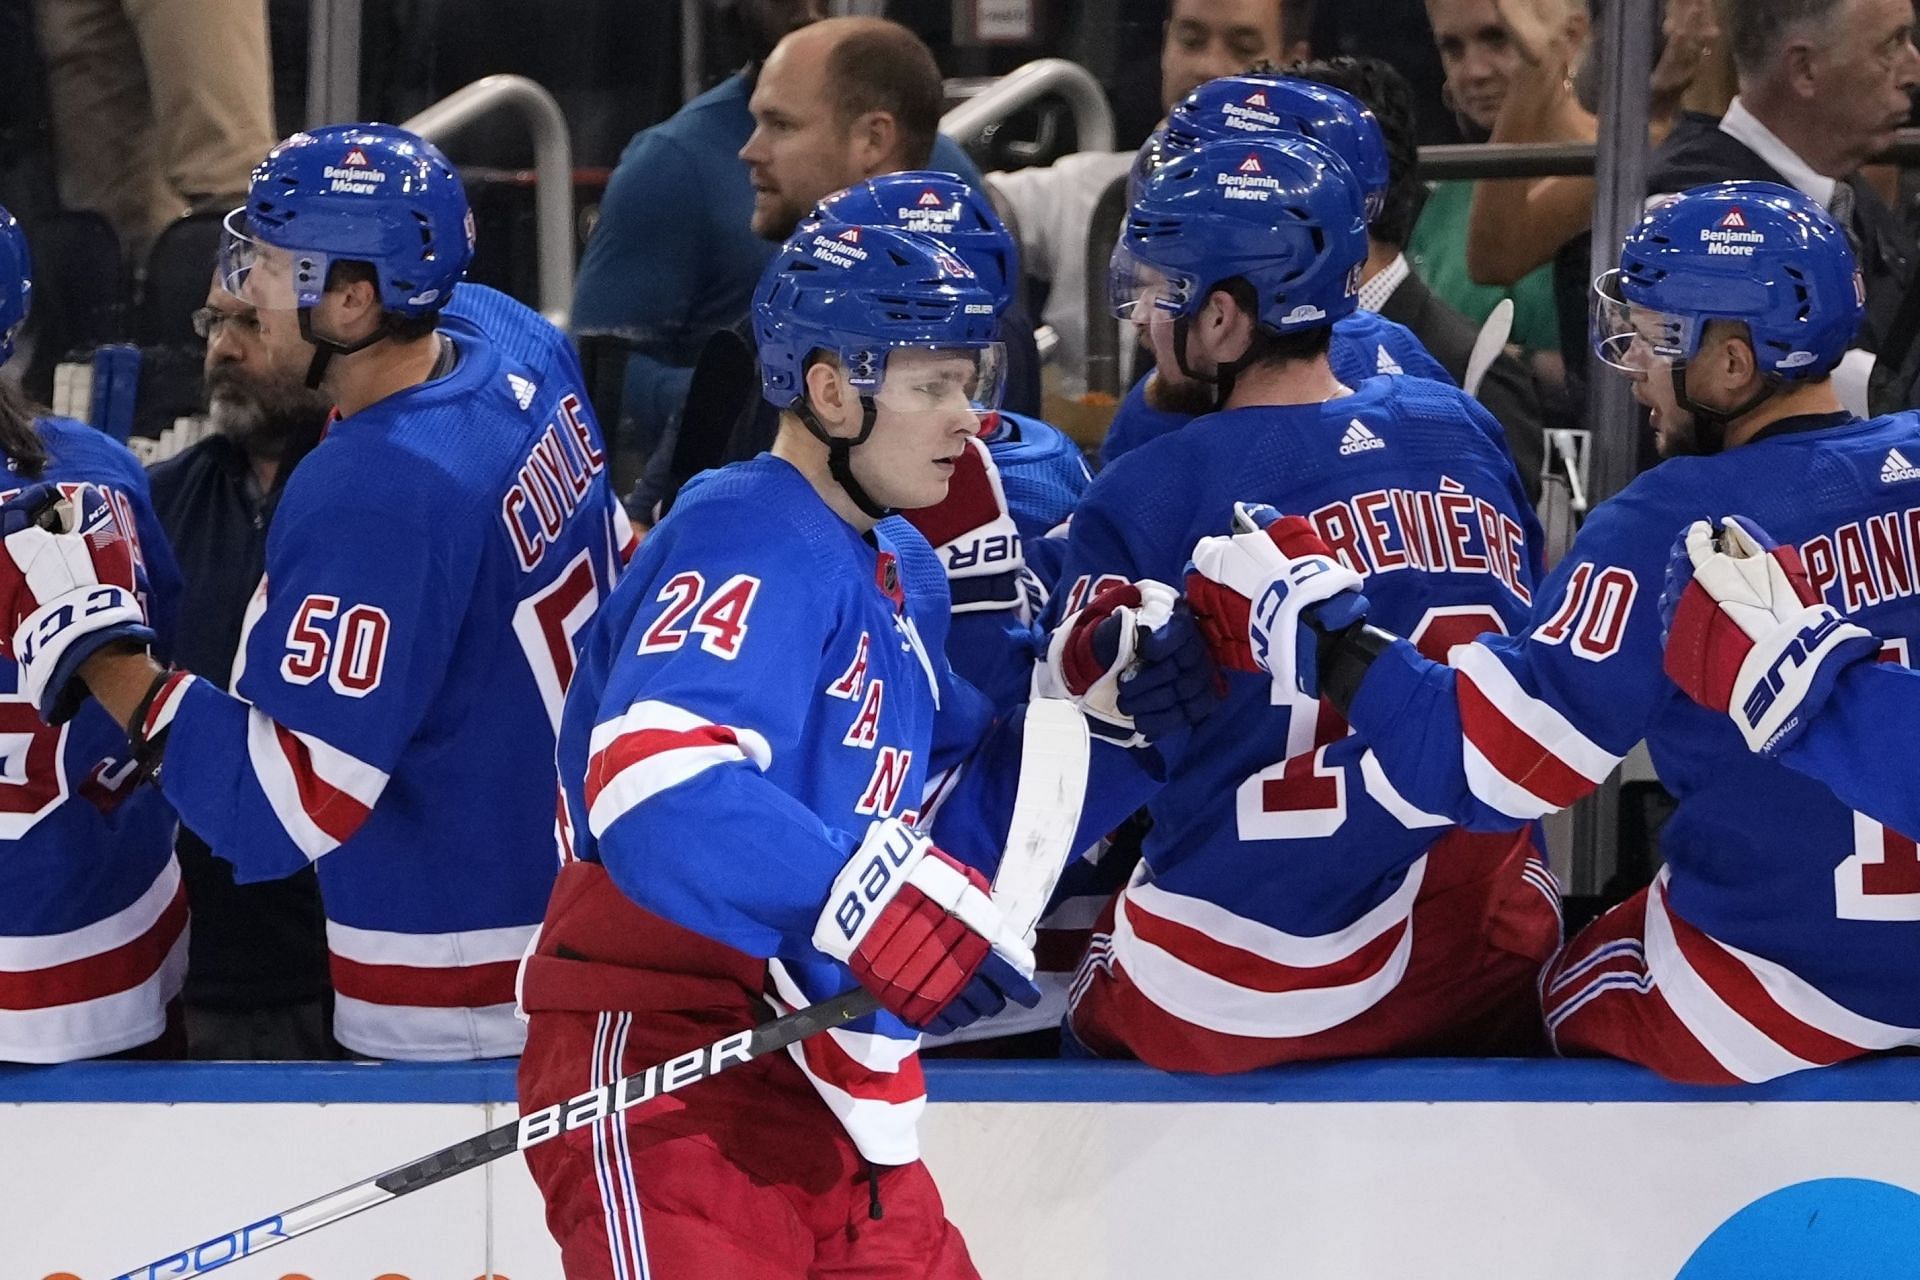 New York Rangers vs Buffalo Sabres: Game Preview, Lines, Odds